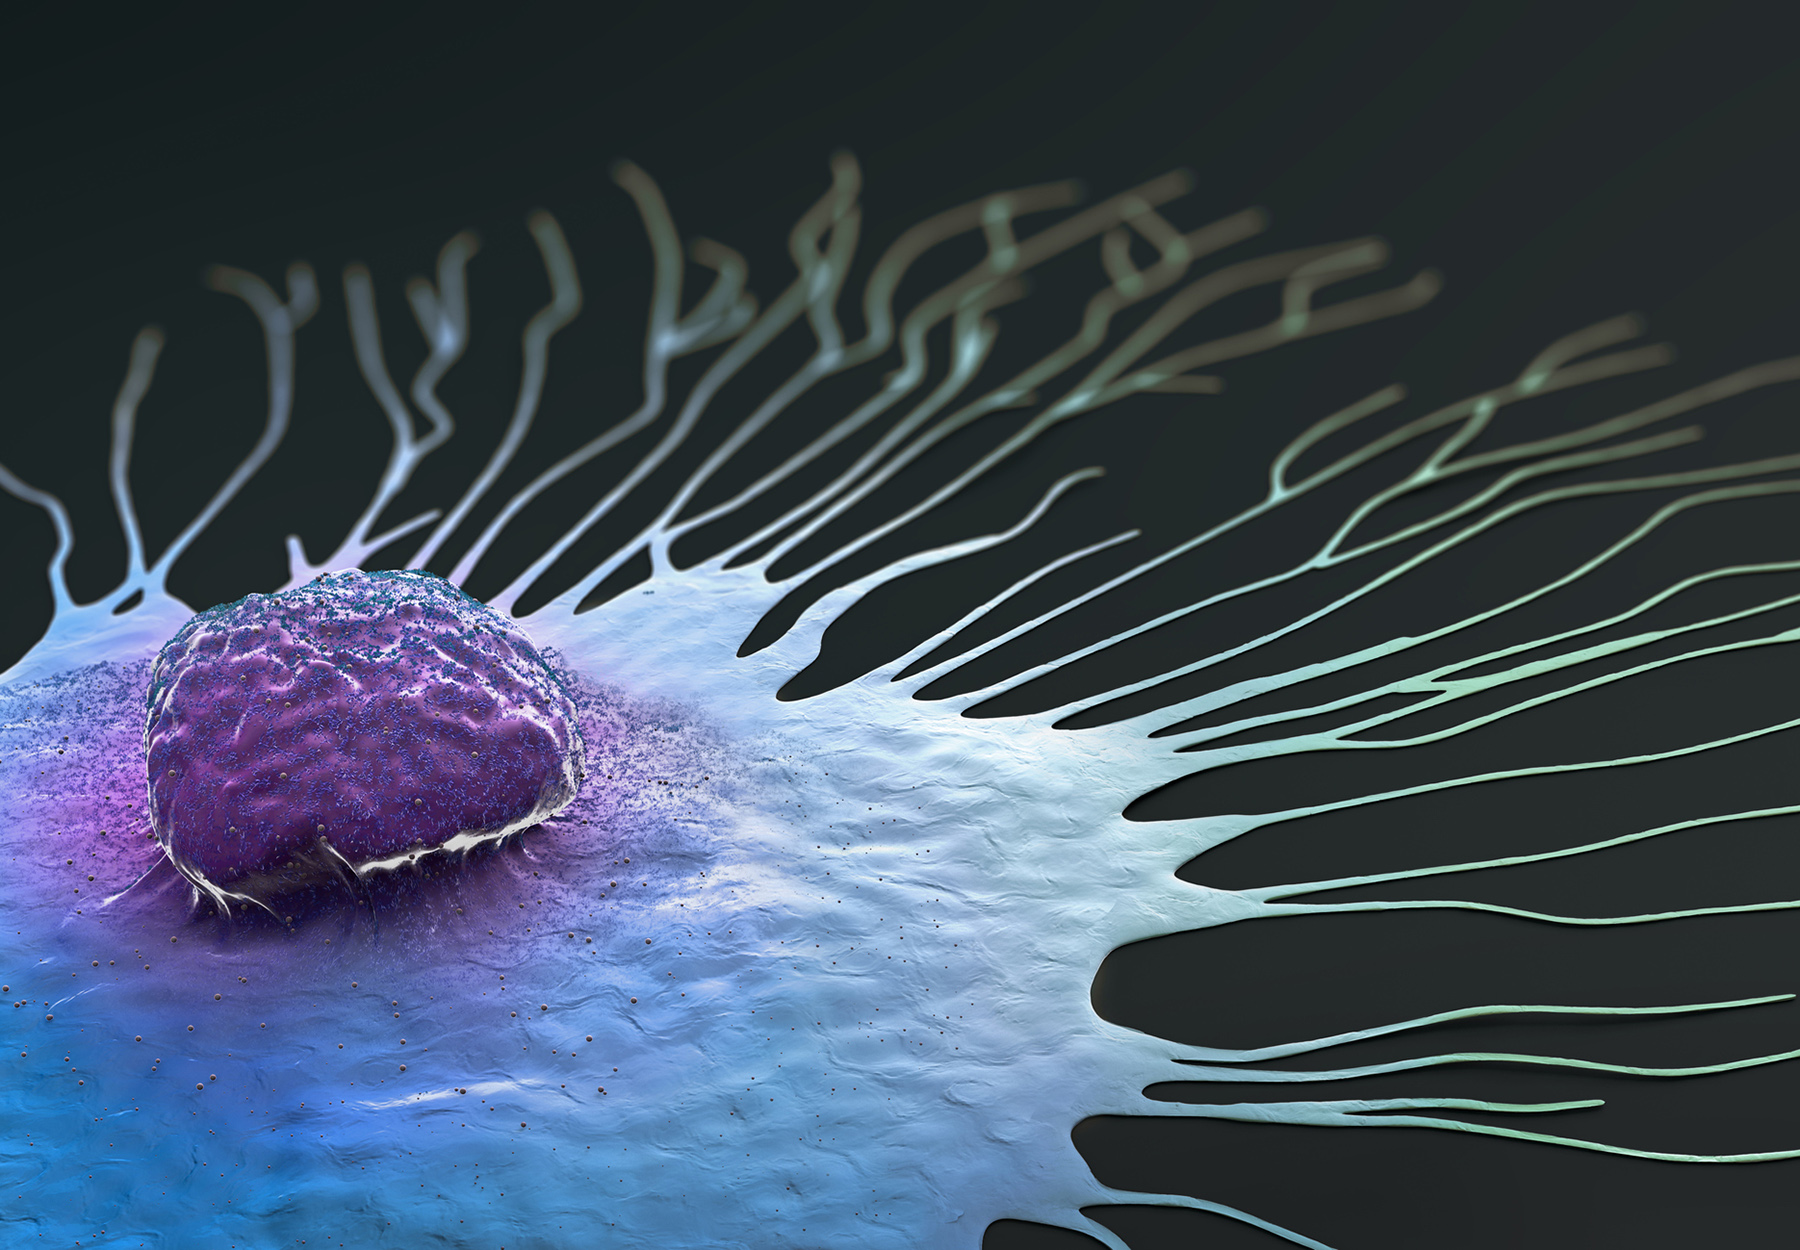 cientific illustration of a migrating breast cancer cell - 3d illustration stock photo